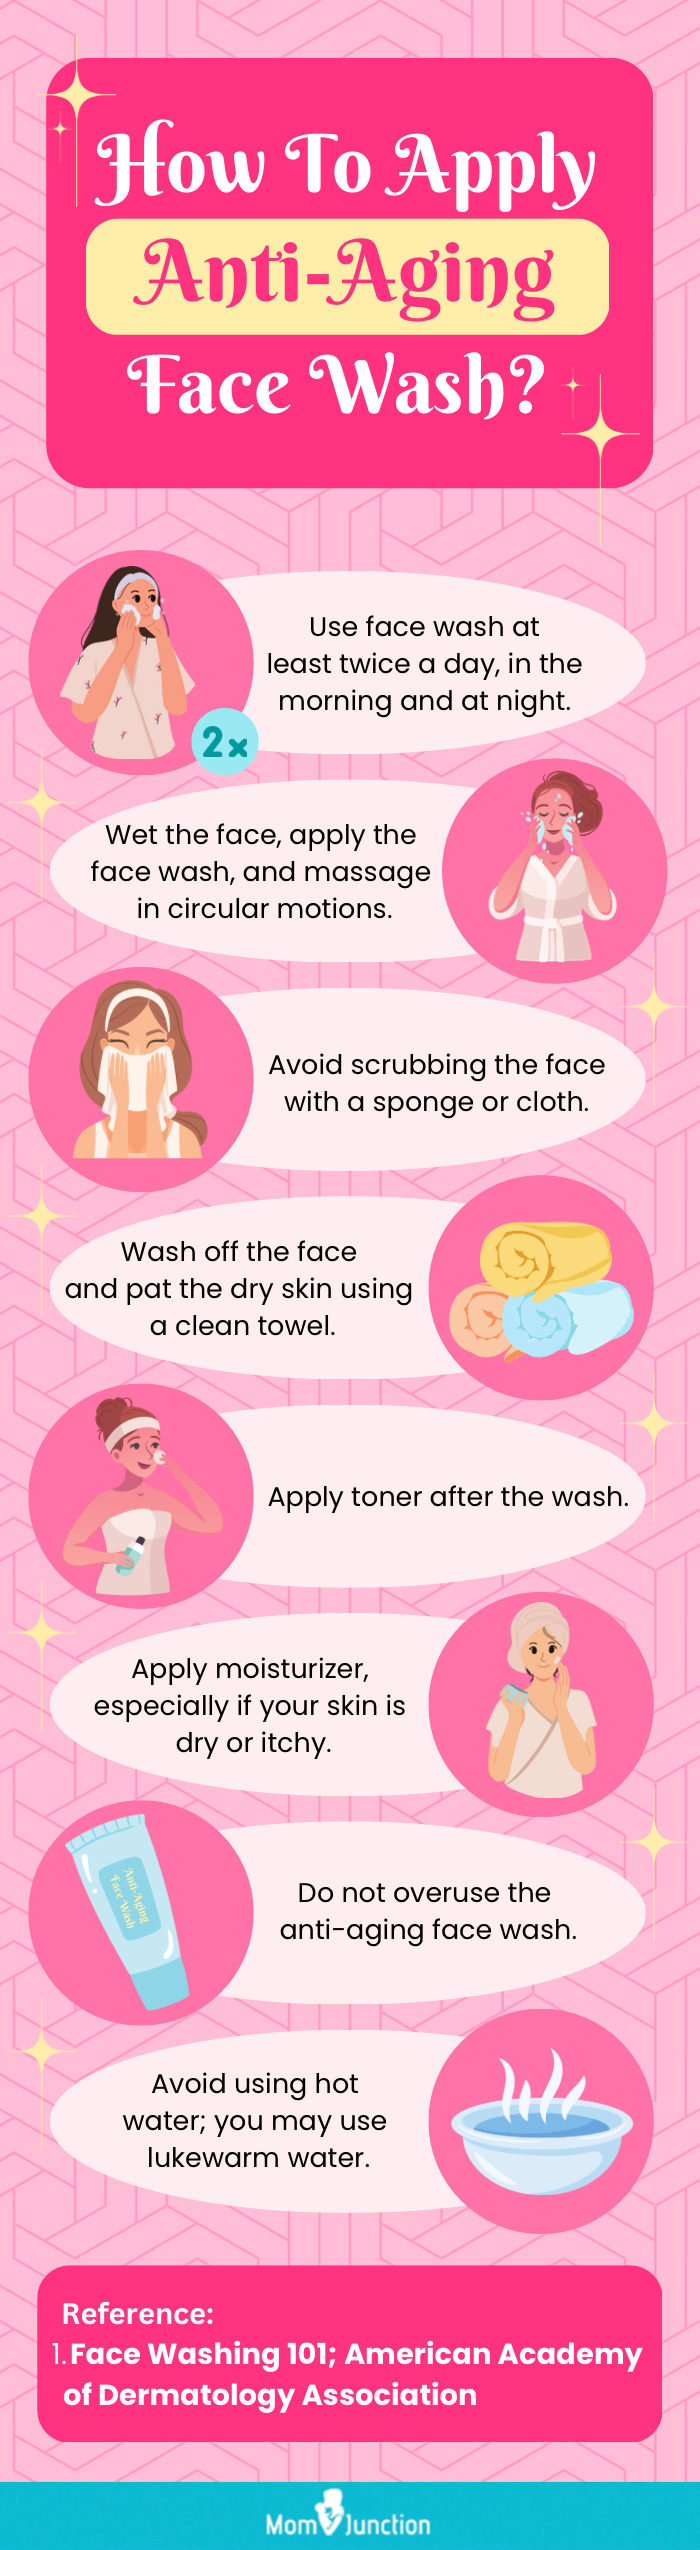 How To Apply Anti-Aging Face Wash (infographic)